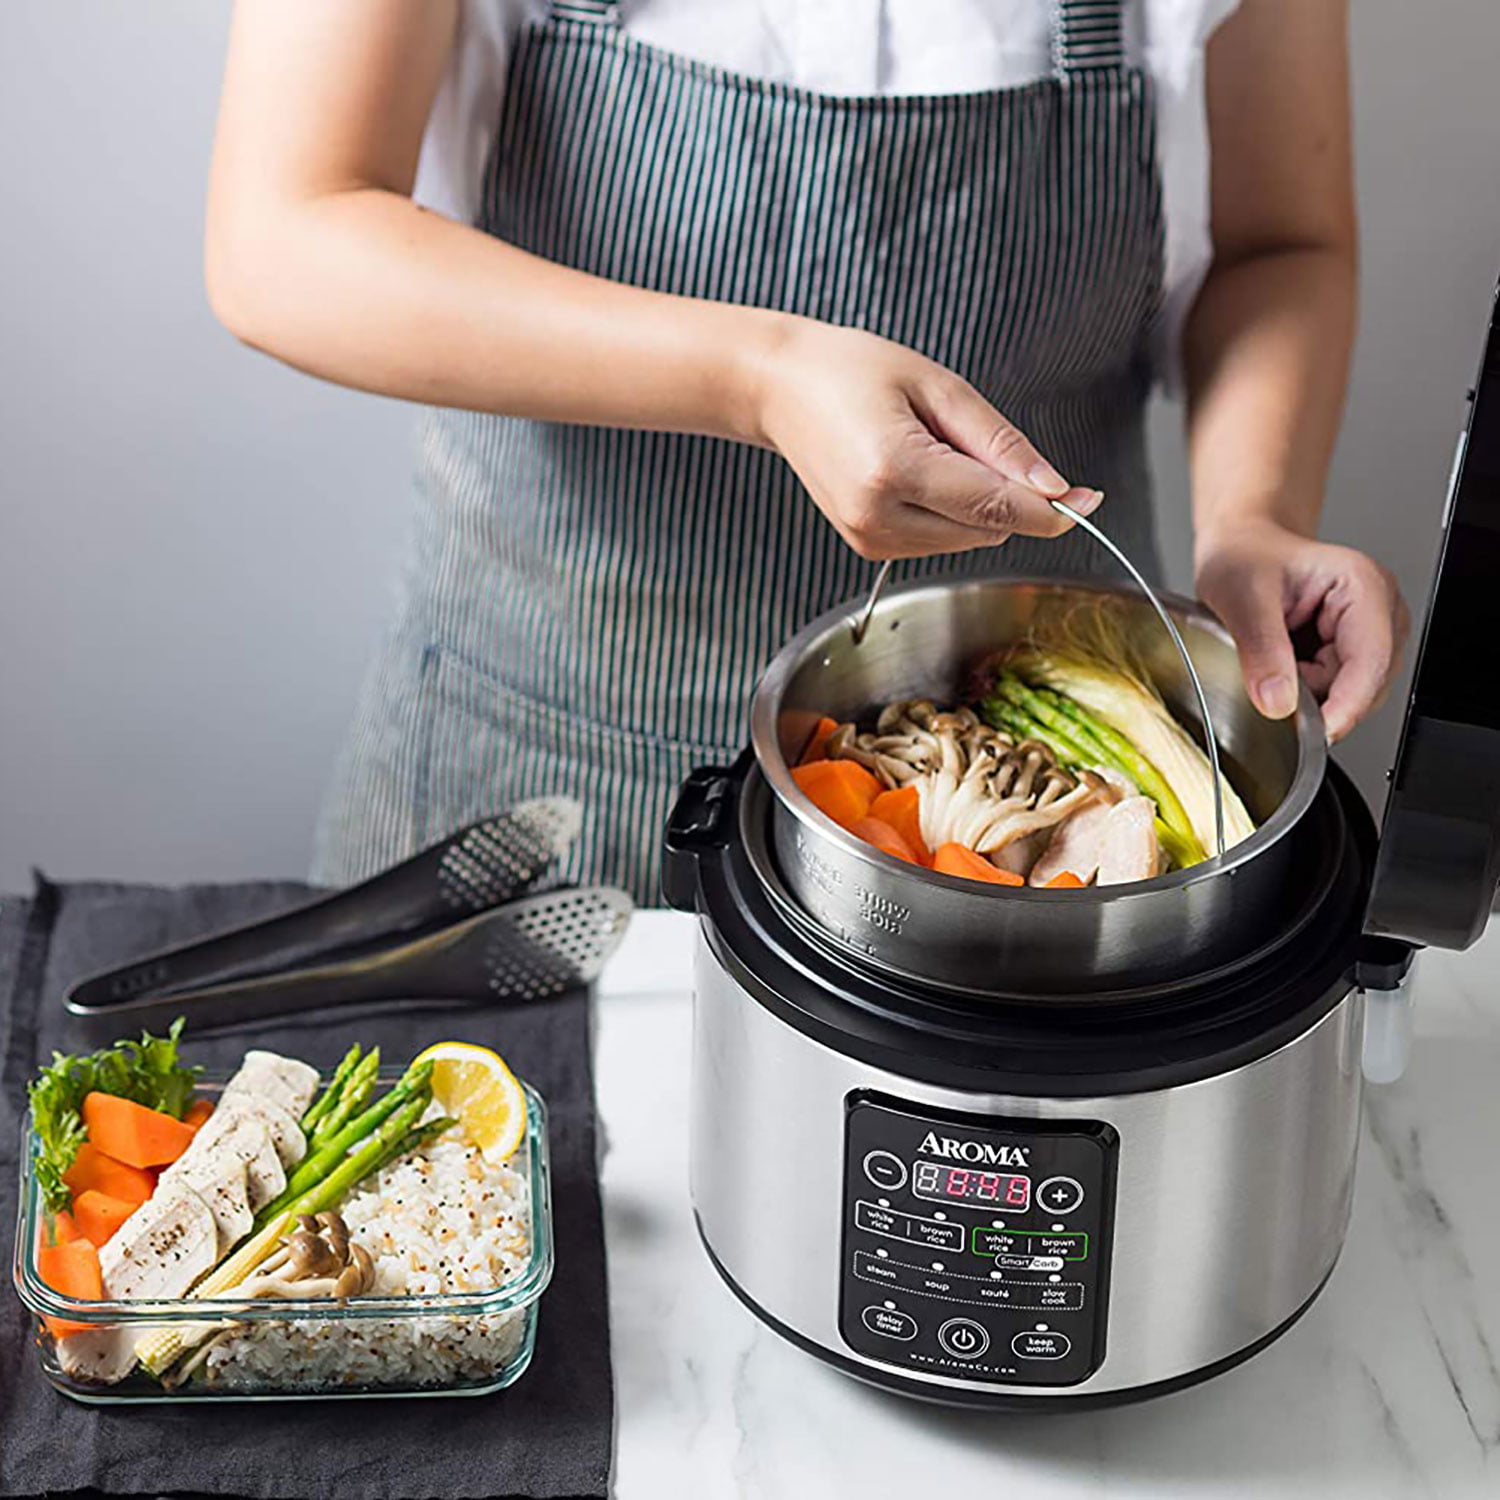 Aroma NutriWare 20 Cup Stainless Steel Rice Cooker NRC-690-SD